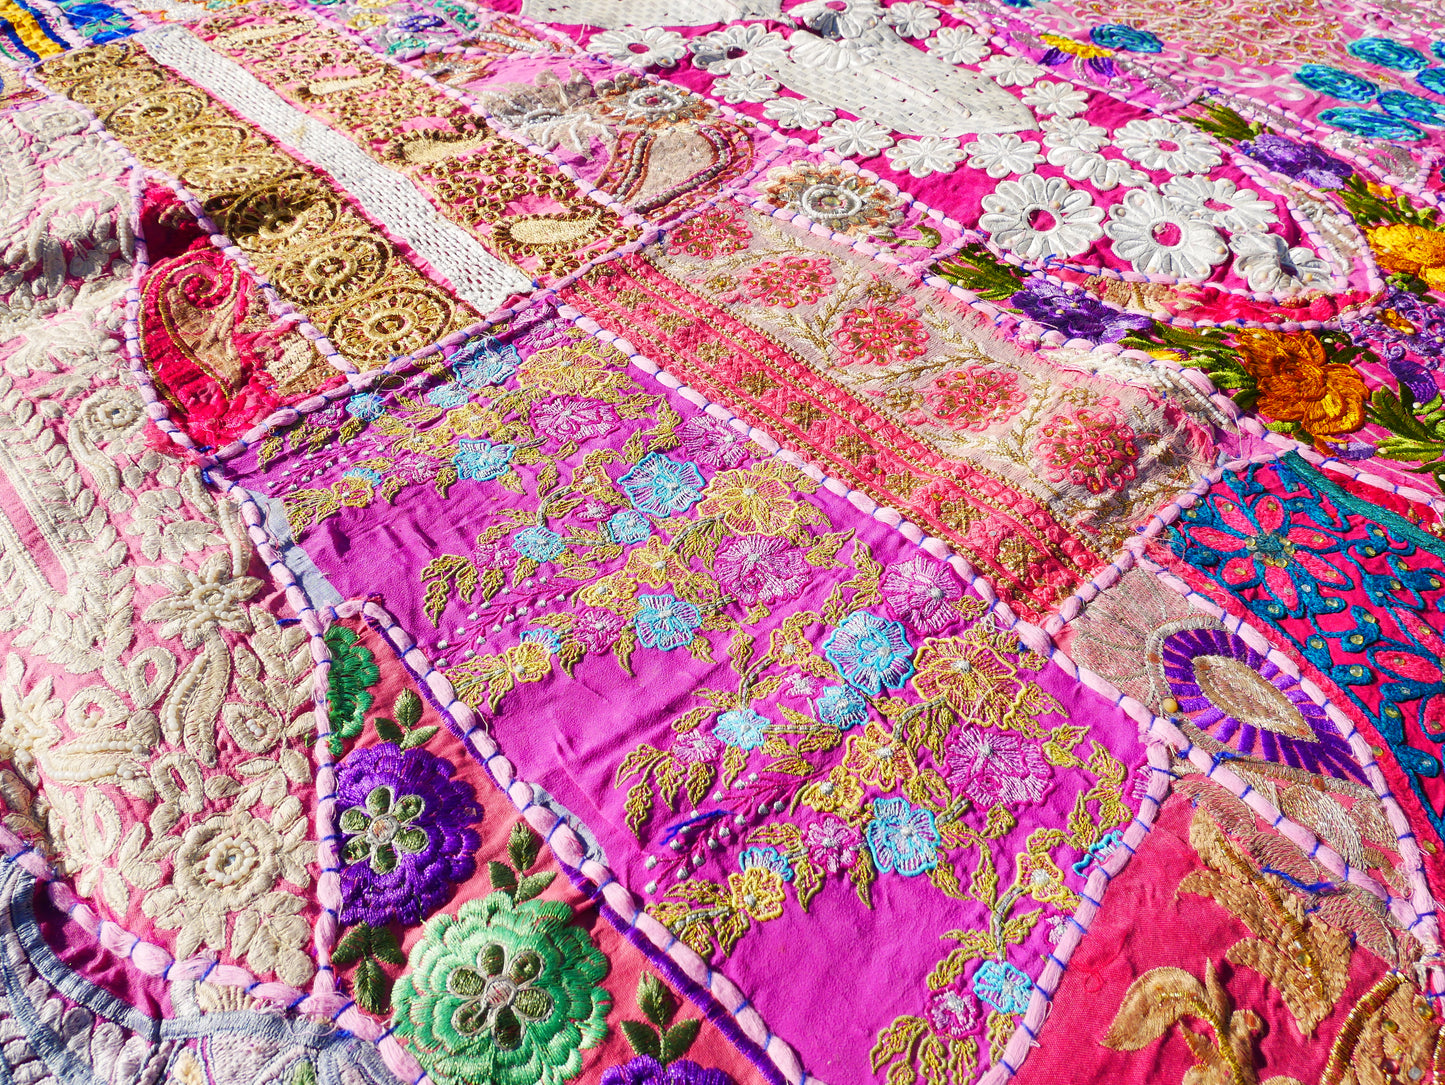 Indian bedding "Hippie Spring" bed throw - patchwork quilt - colorful handmade bedspread